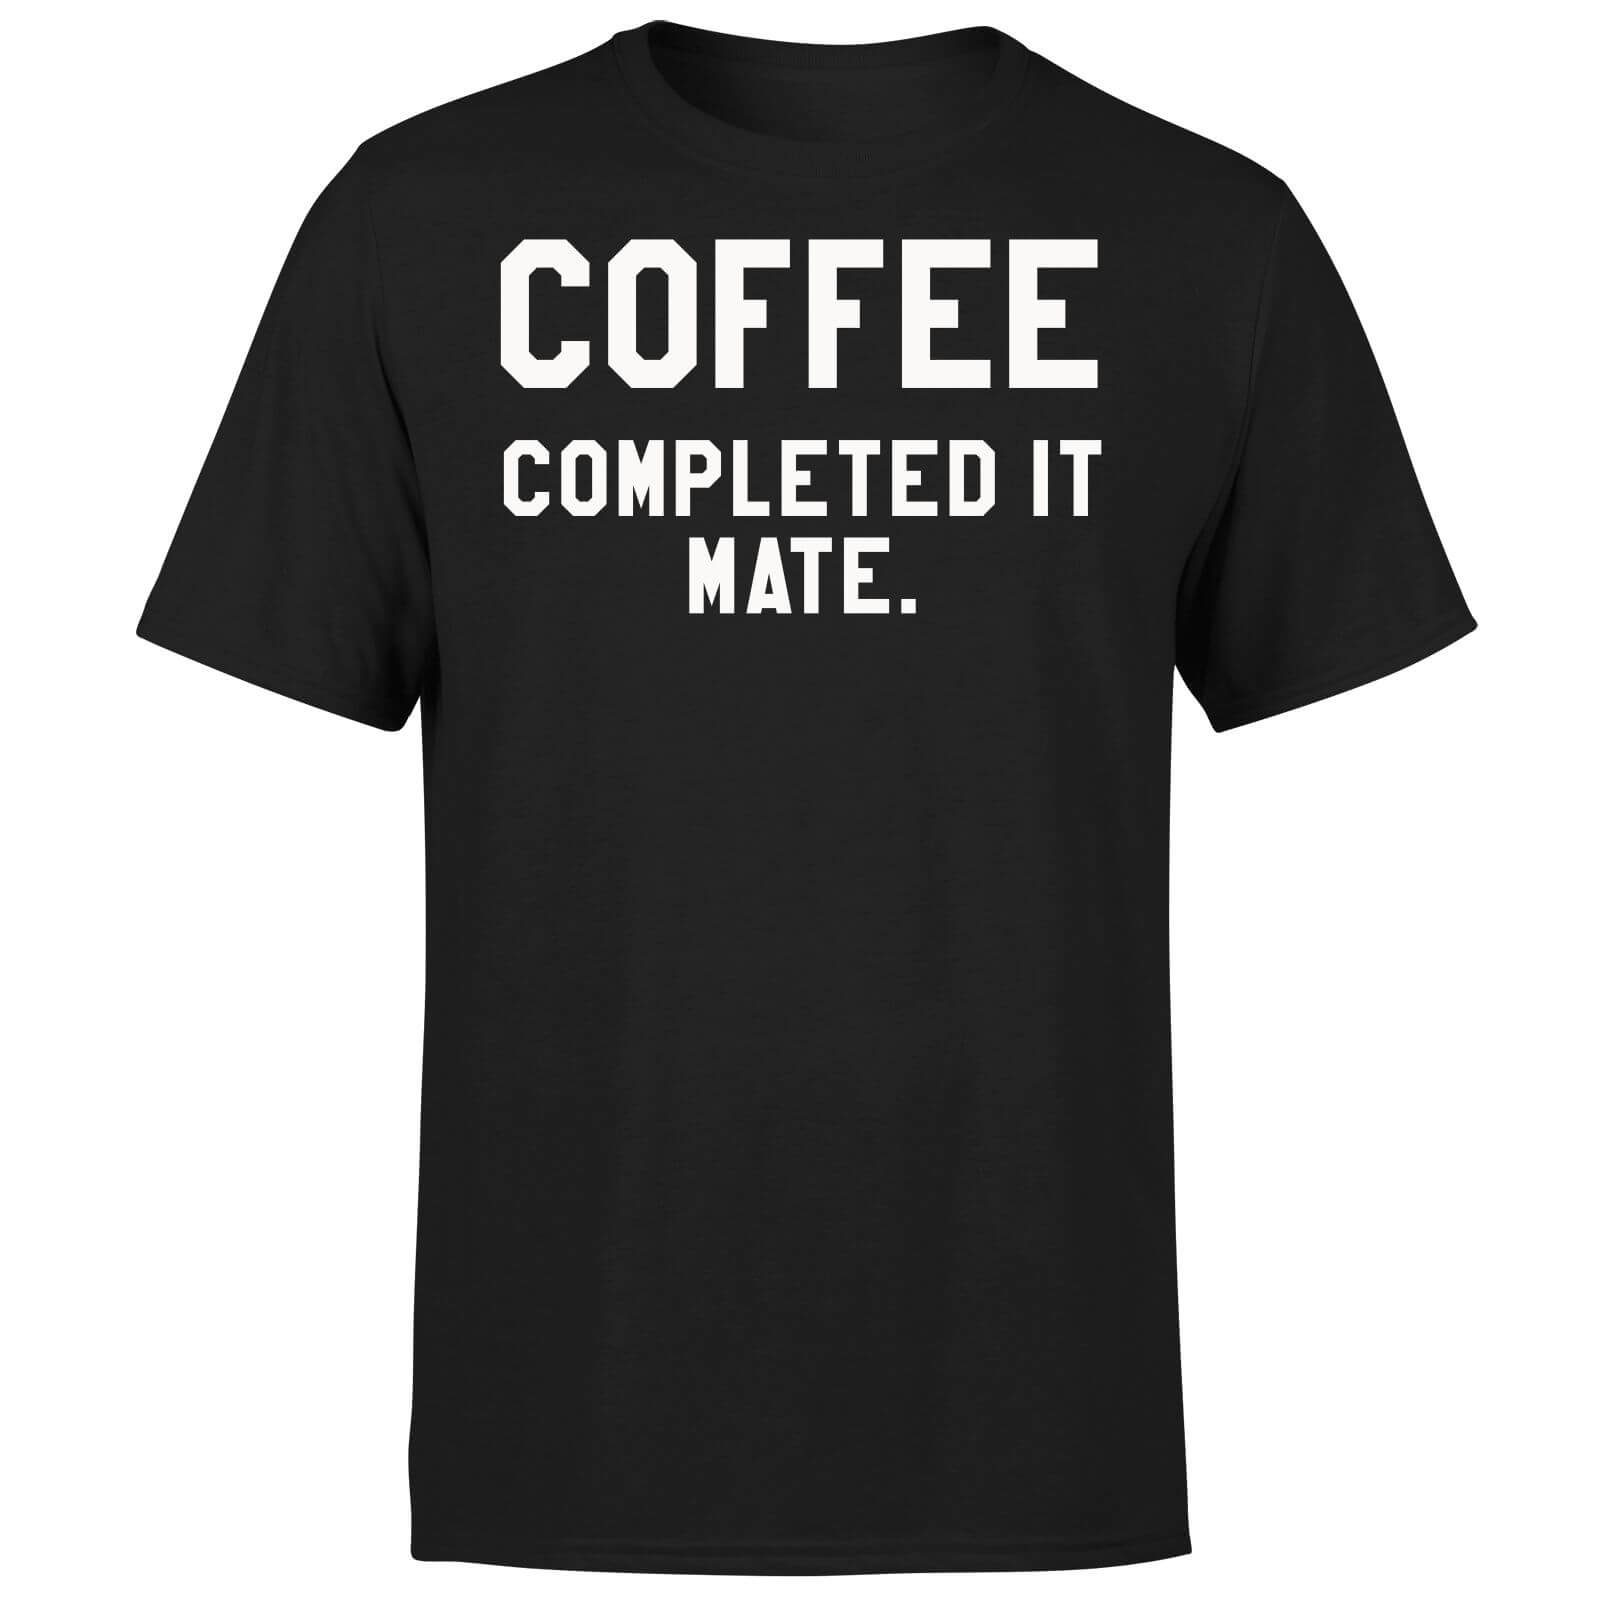 Coffee Completed it Mate T-Shirt - Black - S - Black